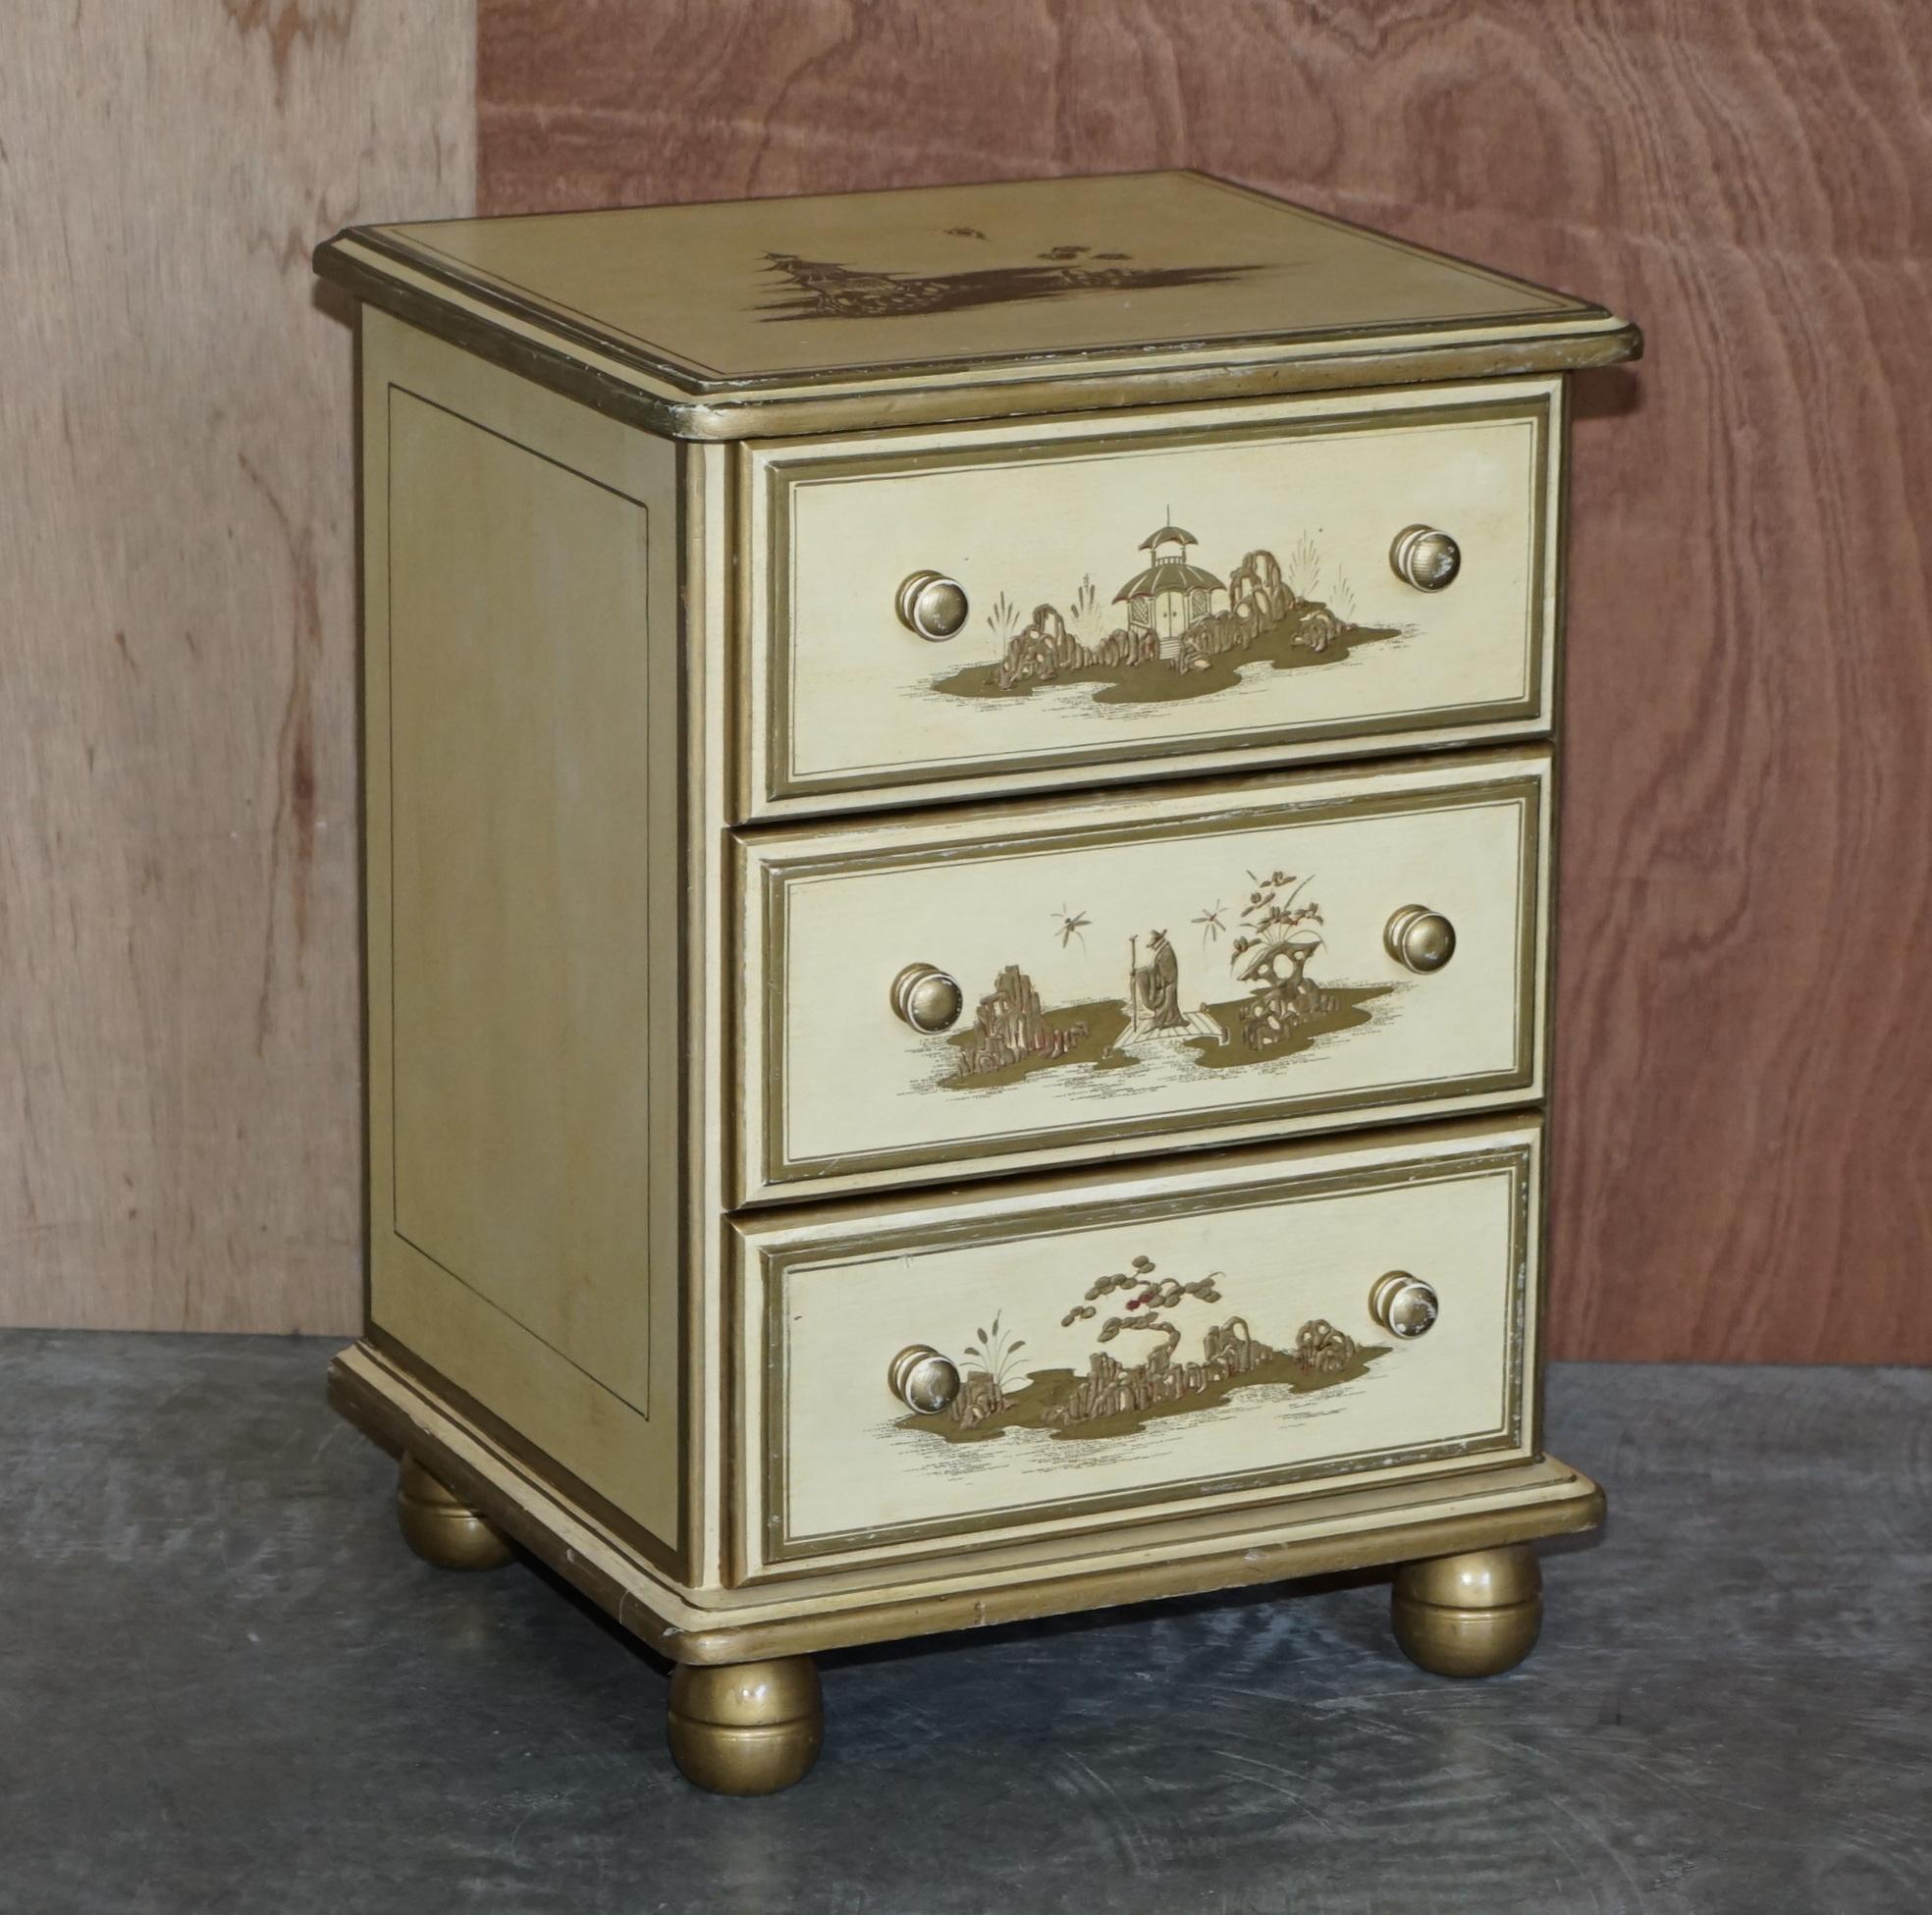 We are delighted to offer for sale this lovely pair of vintage oriental hand painted cream & gold leaf bedside table size chests of drawers

A good looking and nicely made pair, they have a lovely vintage look and feel, they are nicely distressed